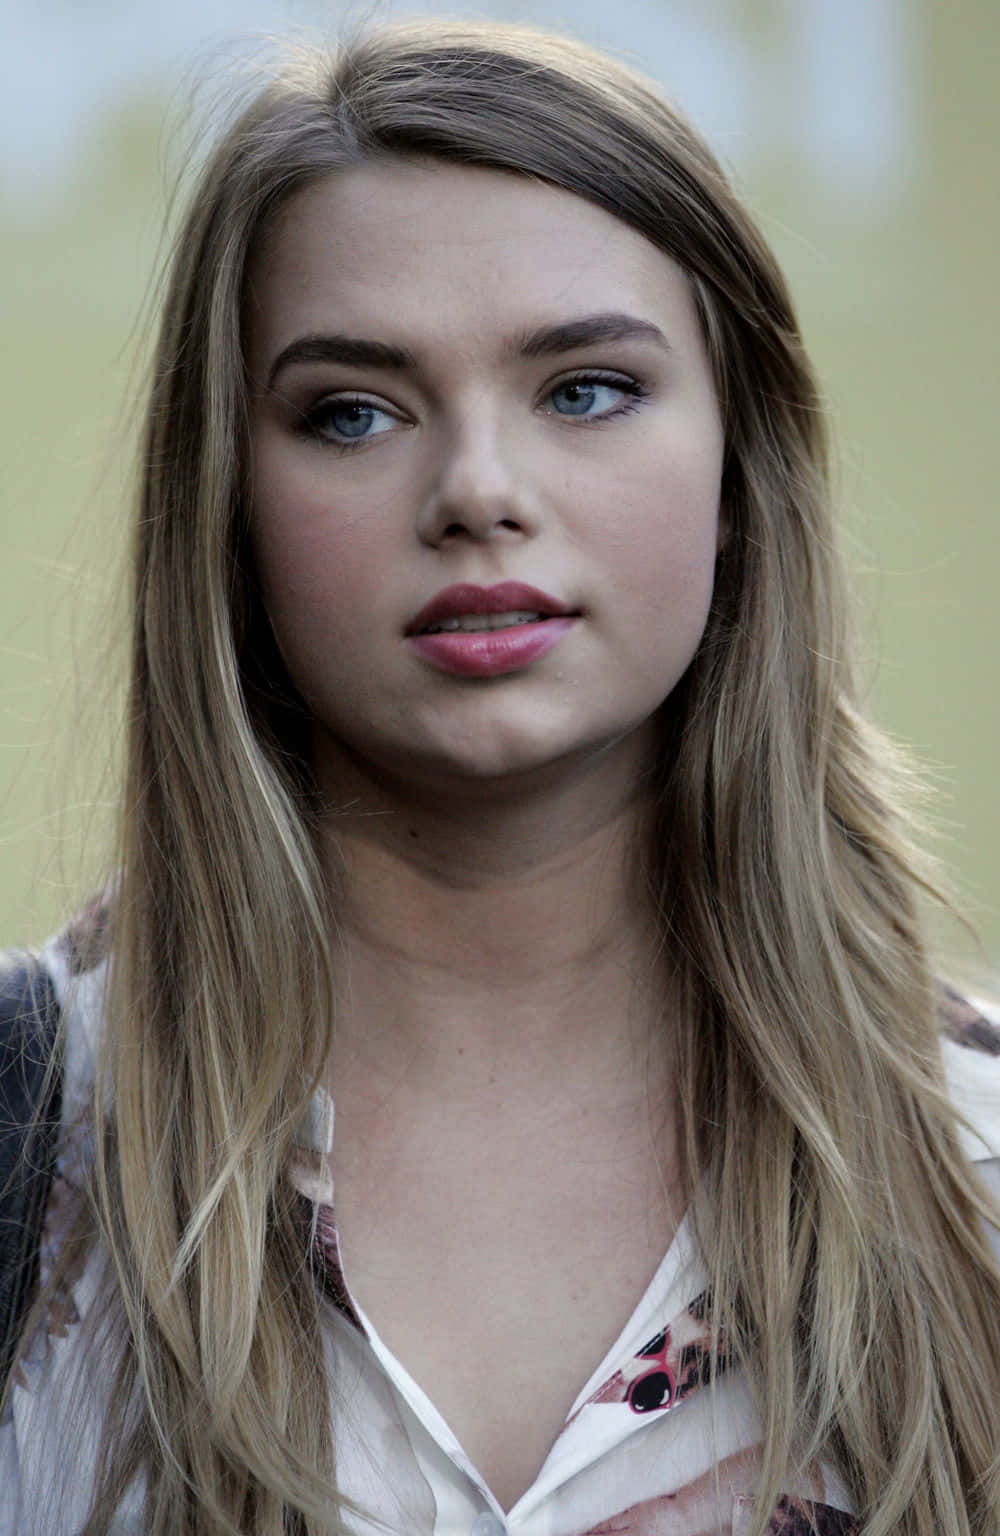 Indiana Evans, A Radiant Beauty In A Mesmerizing Pose. Background